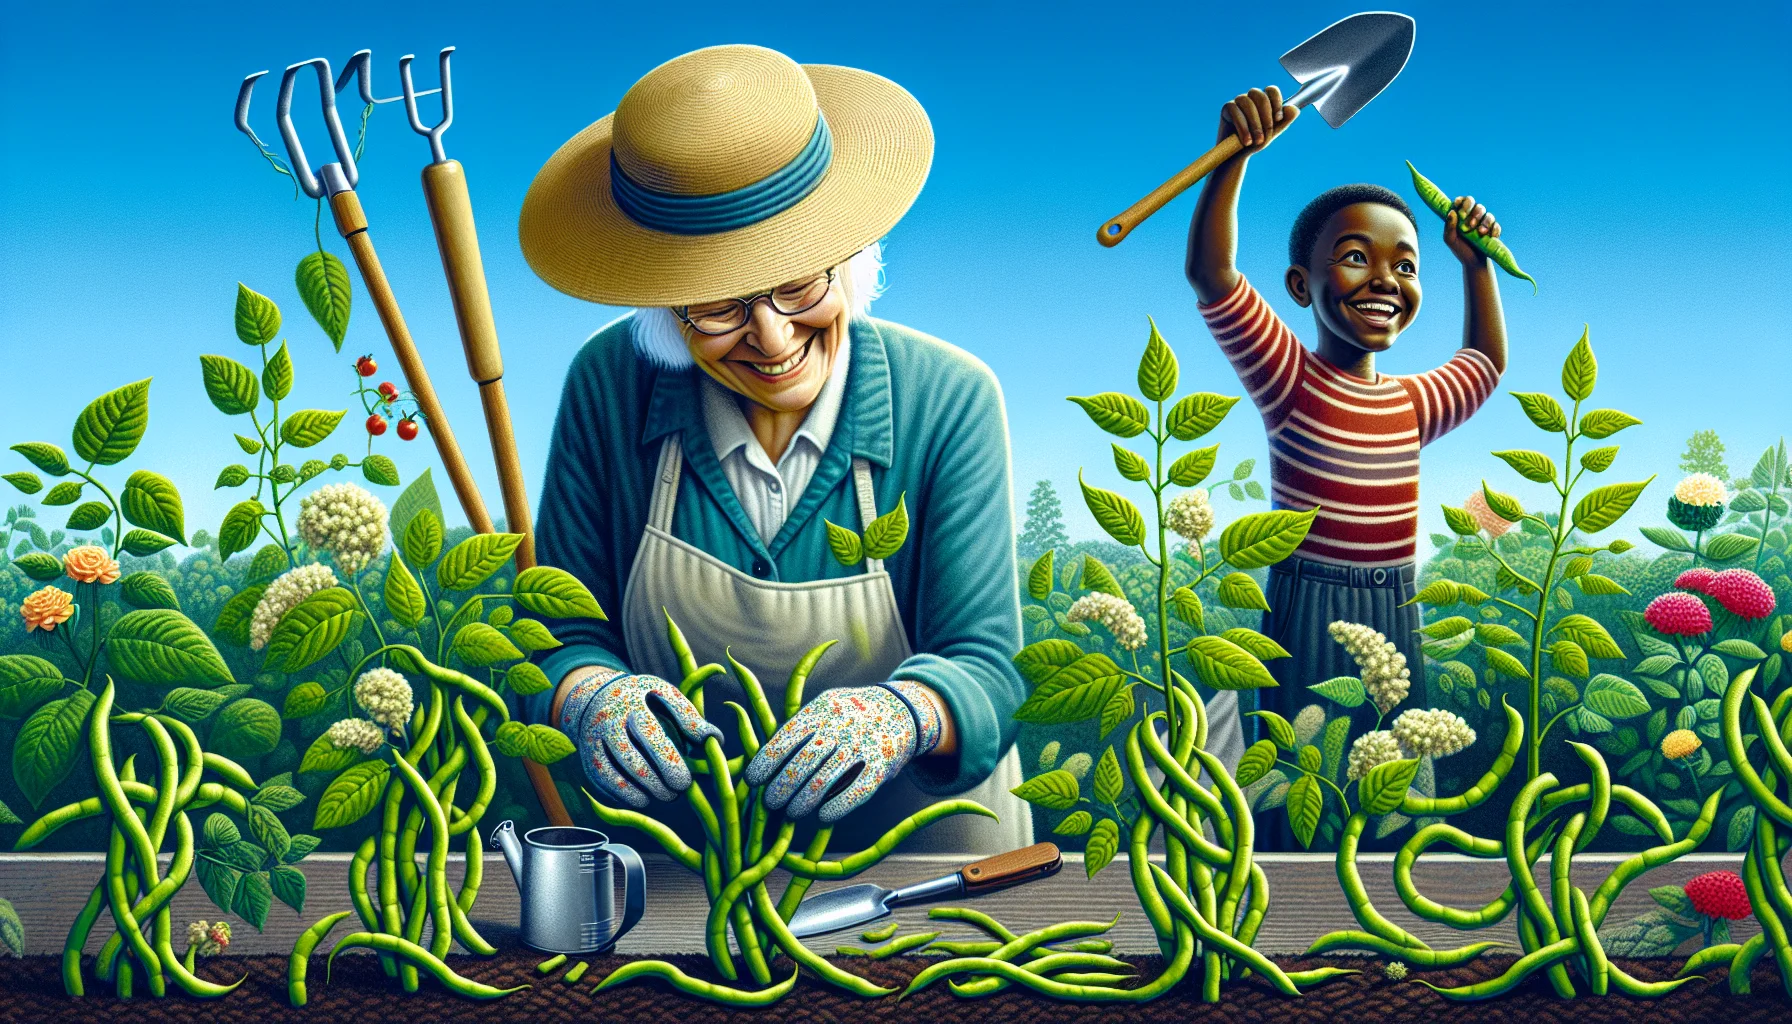 Create an amusing and inviting scene of gardening. The main focus is bush green beans that are humorously growing into twisted shapes and patterns. The beans are on sturdy plants with deep green leaves. A happy White woman in her 60s with a wide-brimmed hat is tenderly caring for the plants, armed with gardening tools. A mischievous Black boy around 10 years old is gleefully picking the unusually shaped beans. The entire scene is under a perfectly clear blue sky, full of warmth and cheerfulness, exuding a sense of joy and satisfaction given only by interacting with nature.